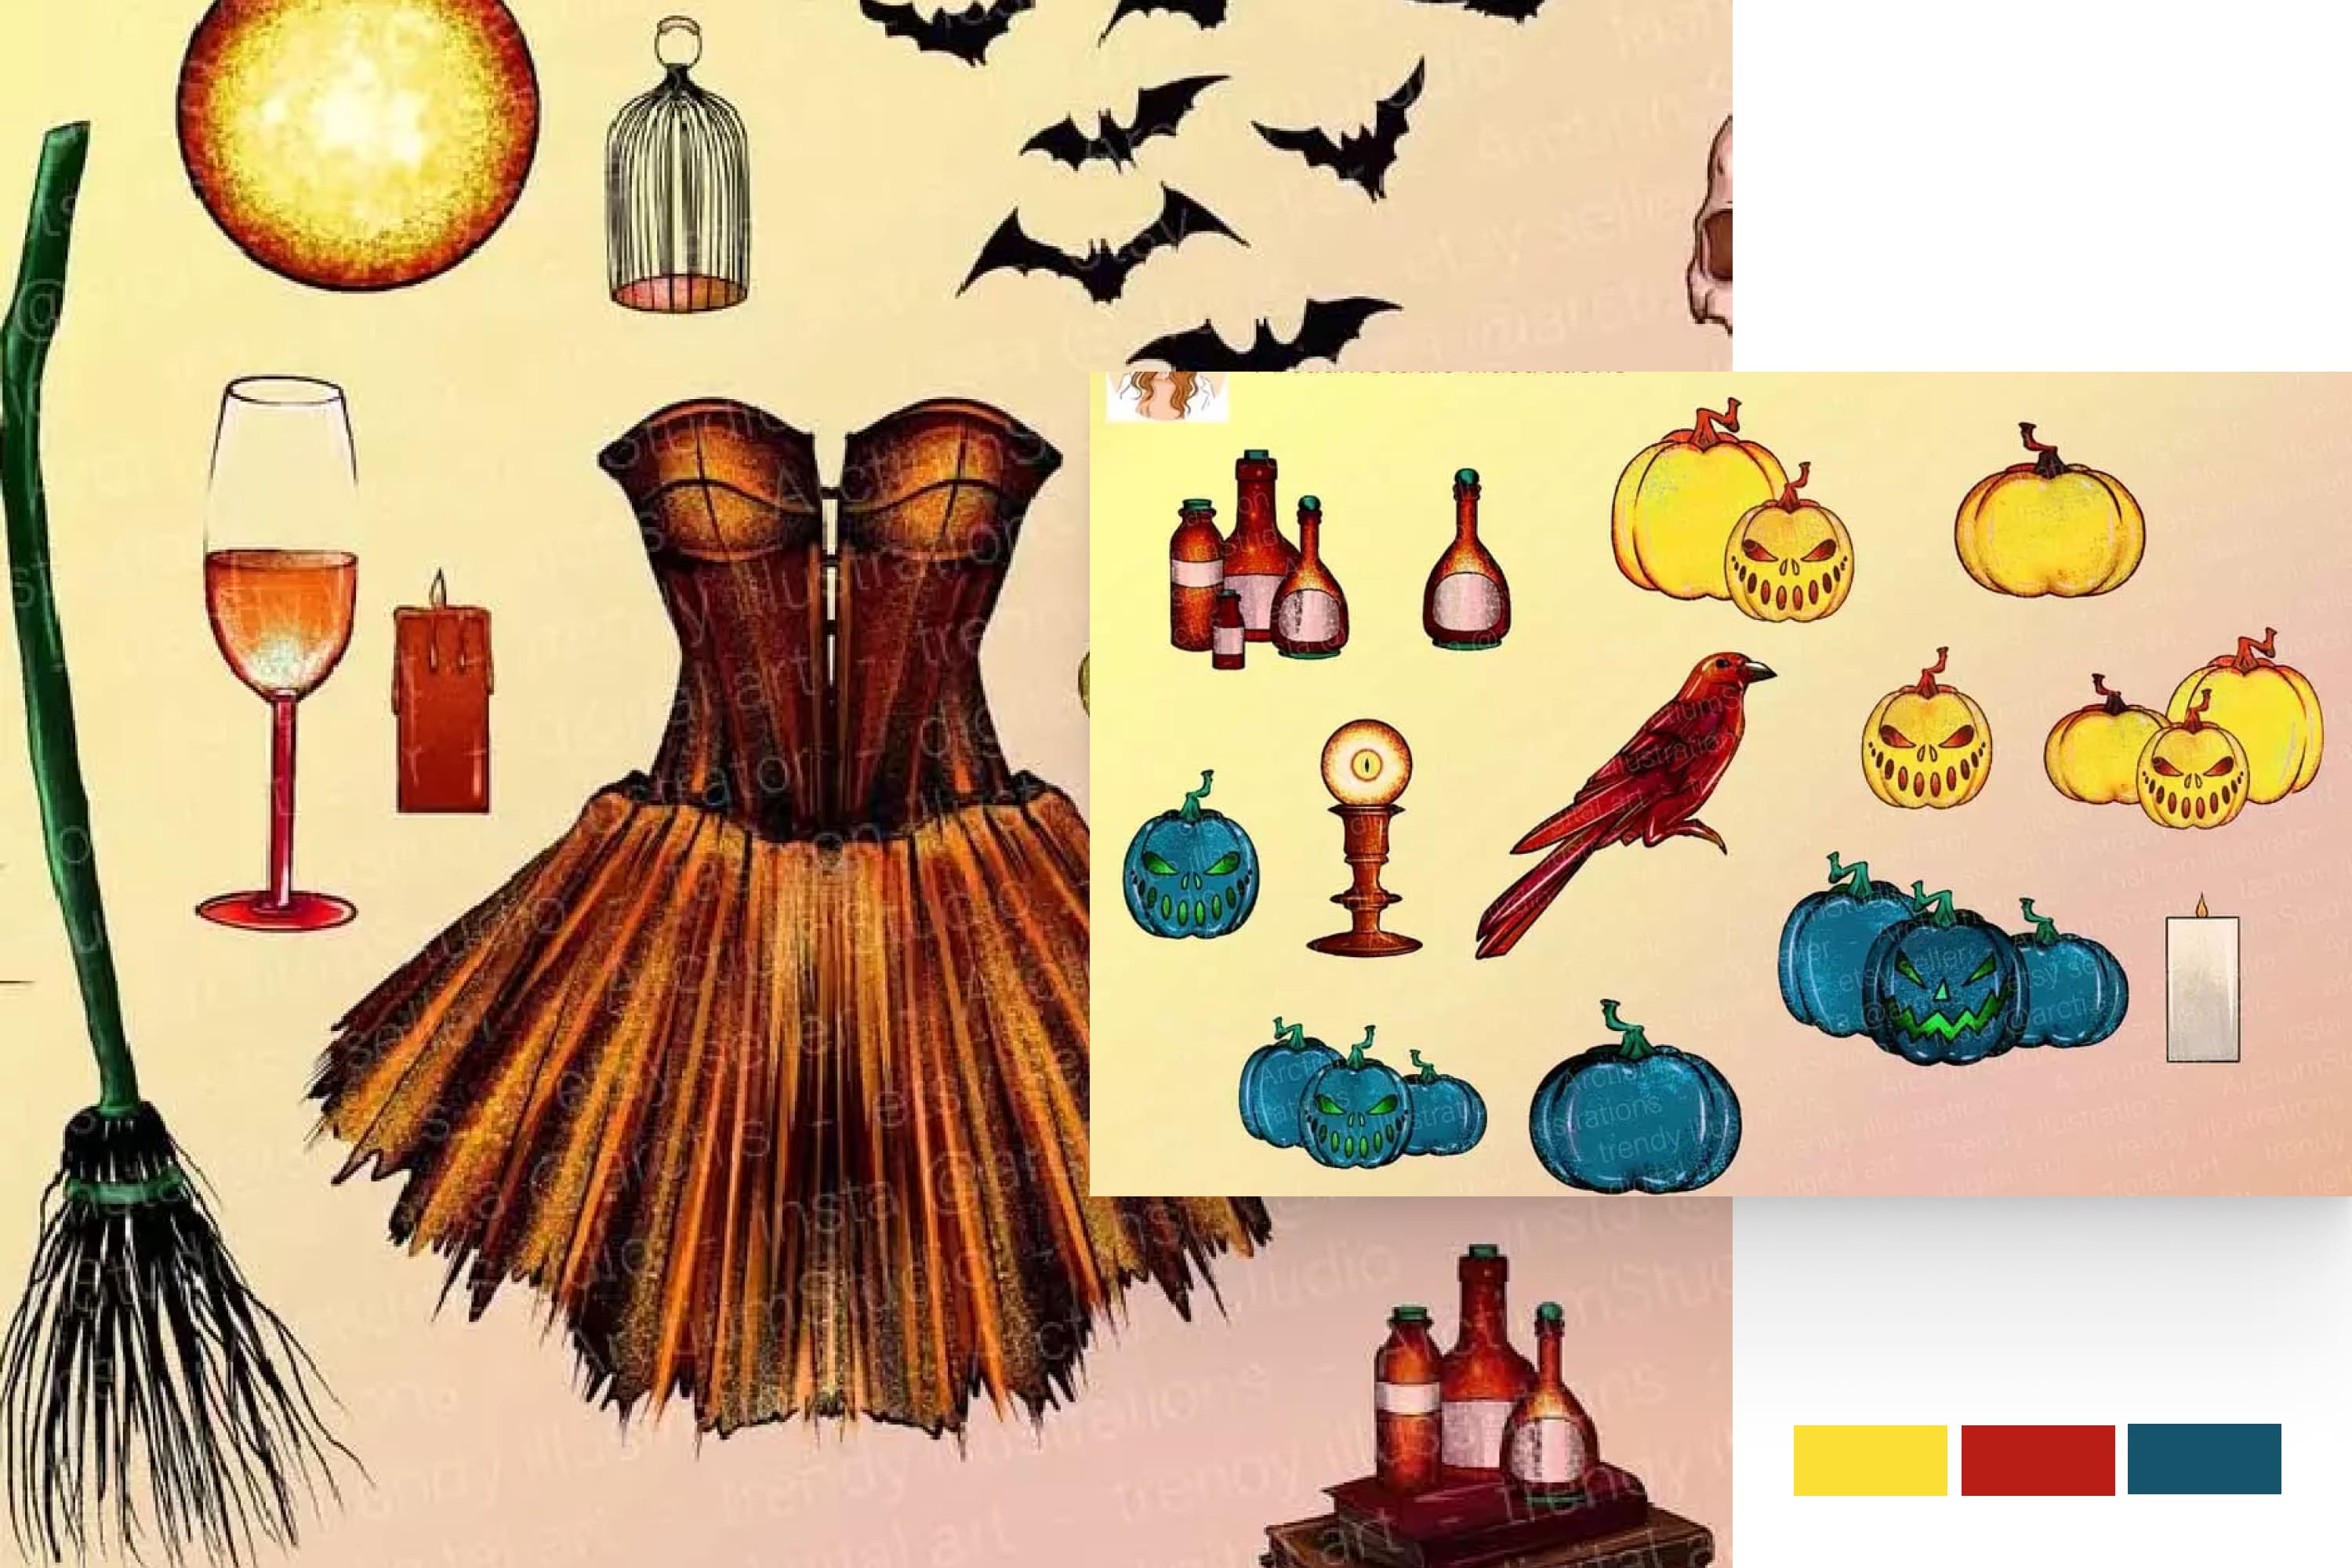 Collage of drawn broom, goblet, crow, pumpkins, potion bottles and witch dress.